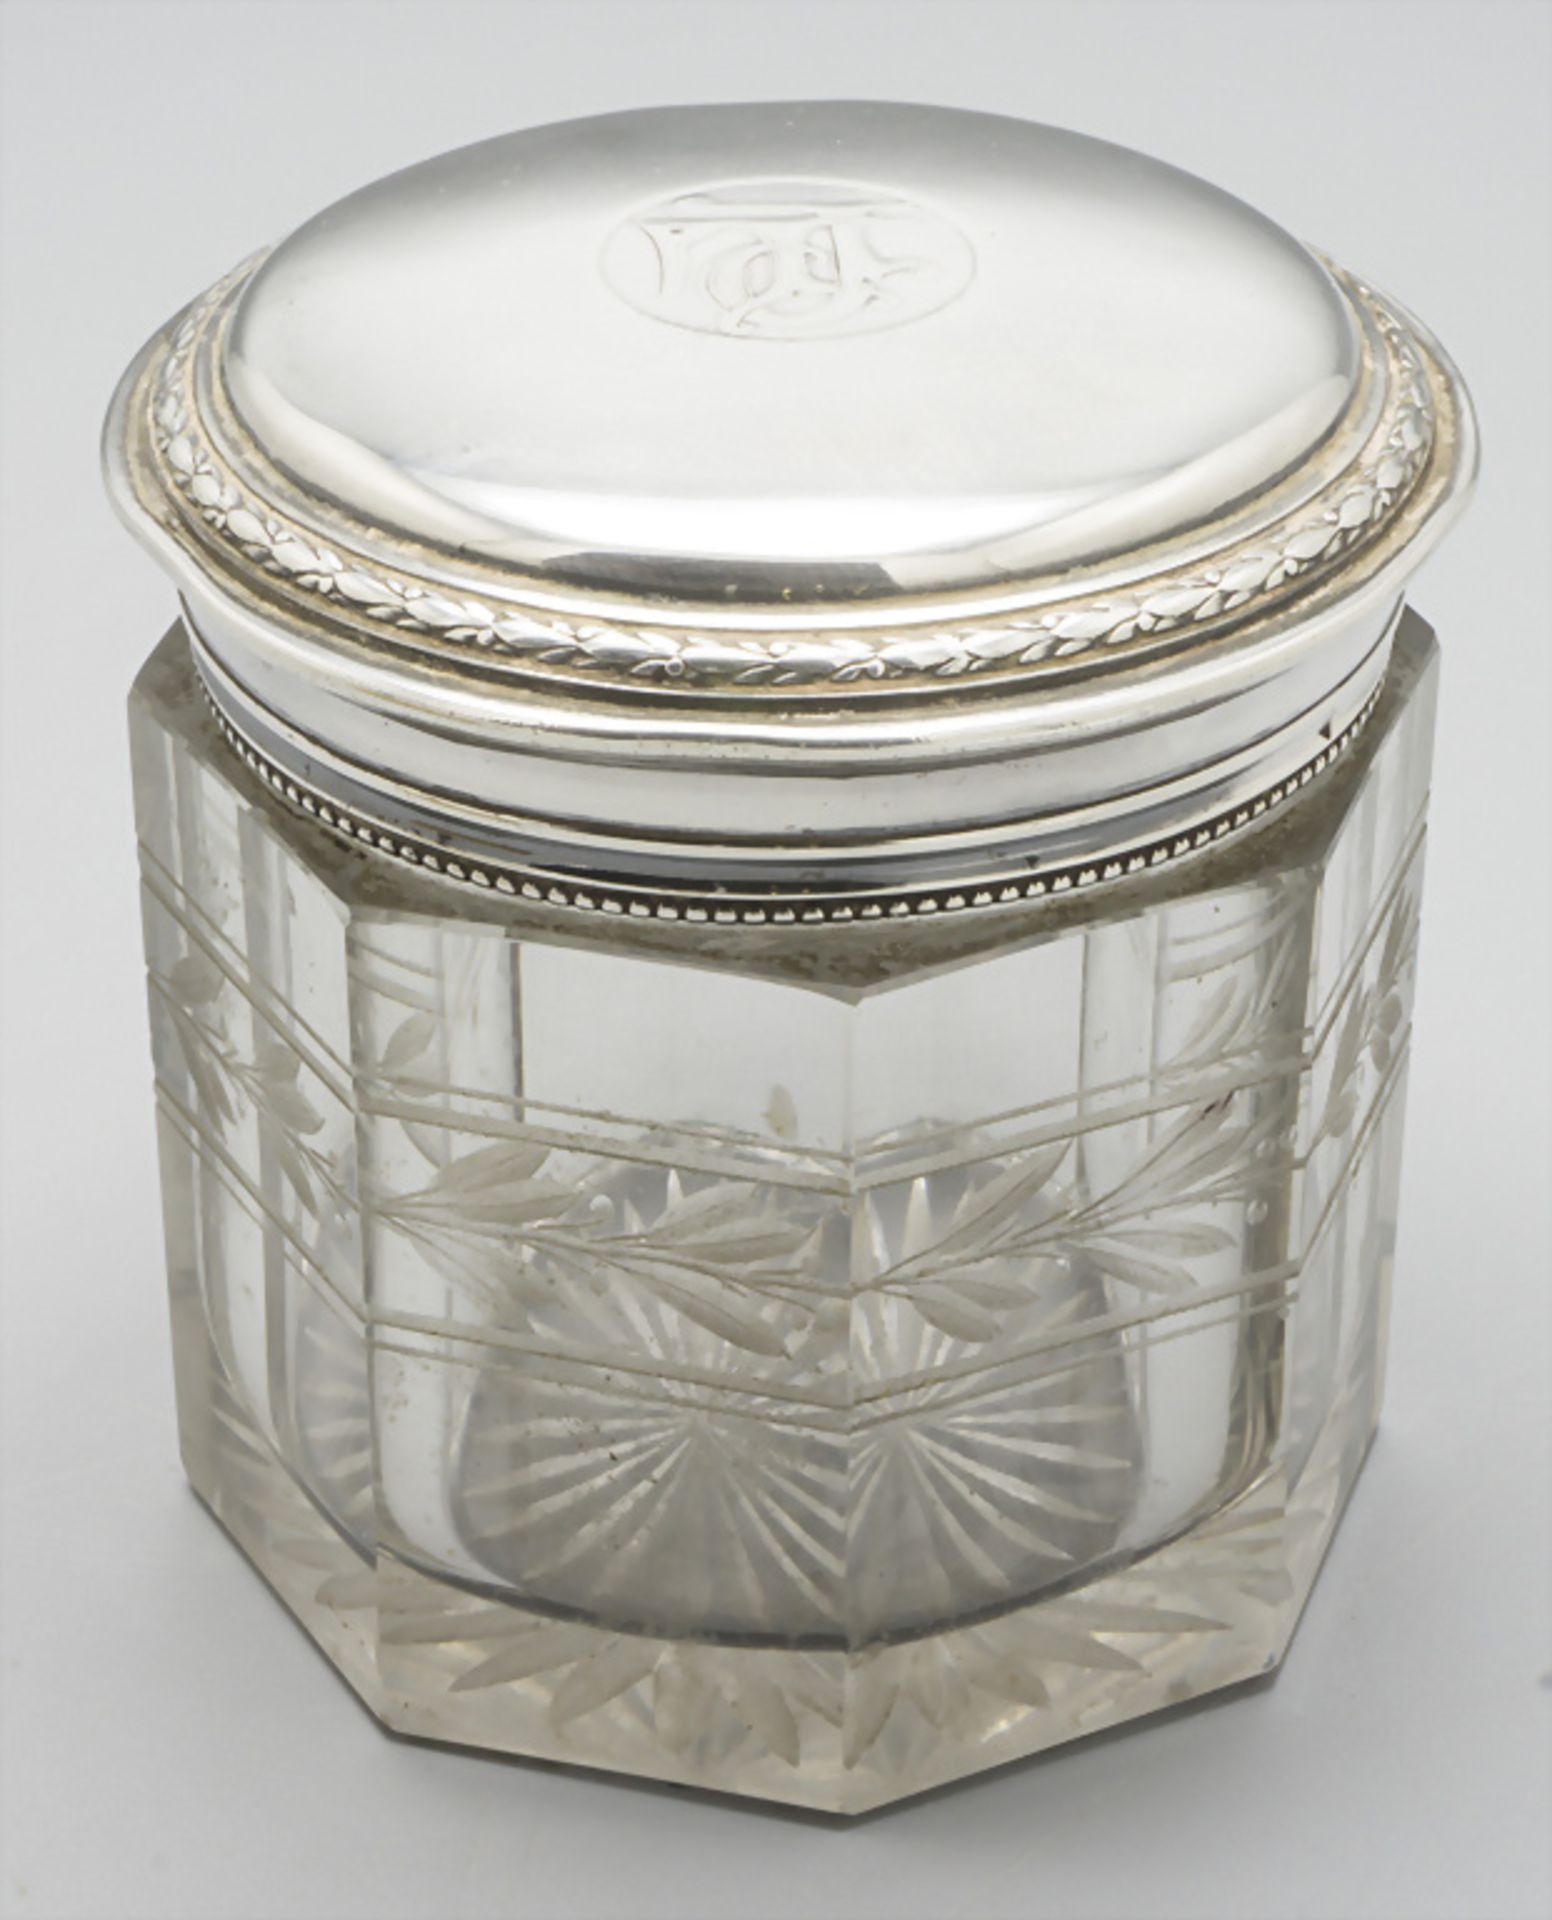 Glasdose mit Silberdeckel / A glass box with silver cover, Paris, um 1880 - Image 2 of 5